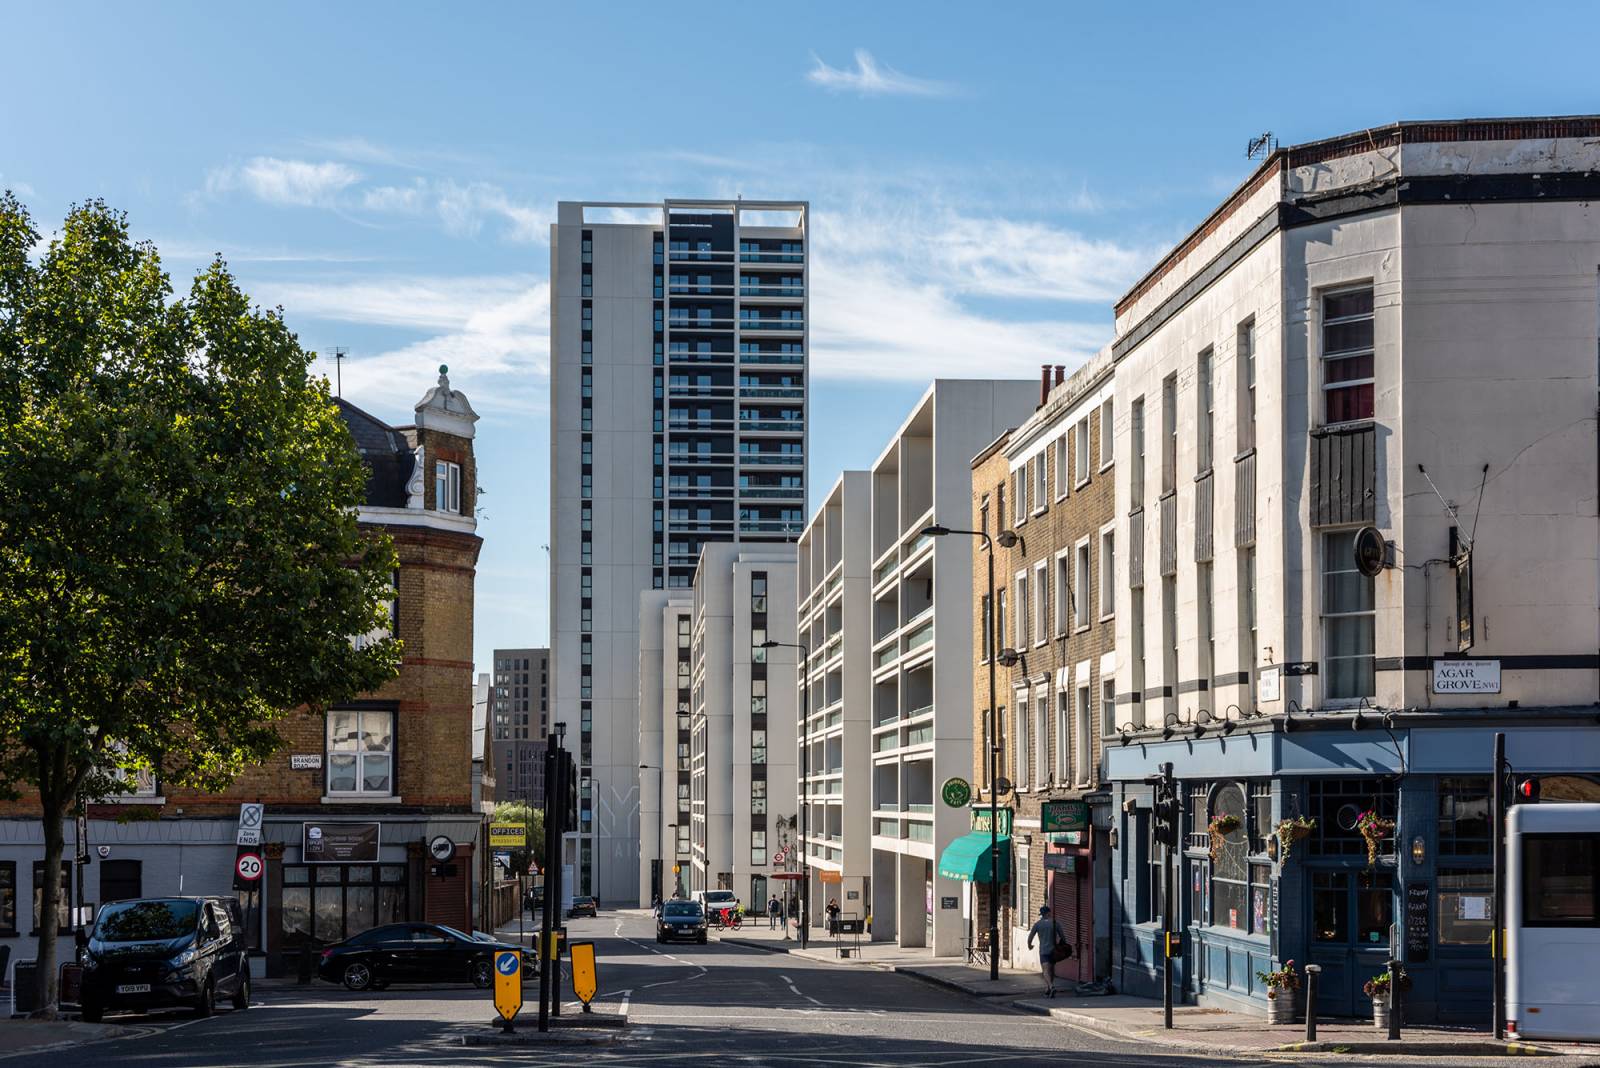 New build homes and developments in Camden